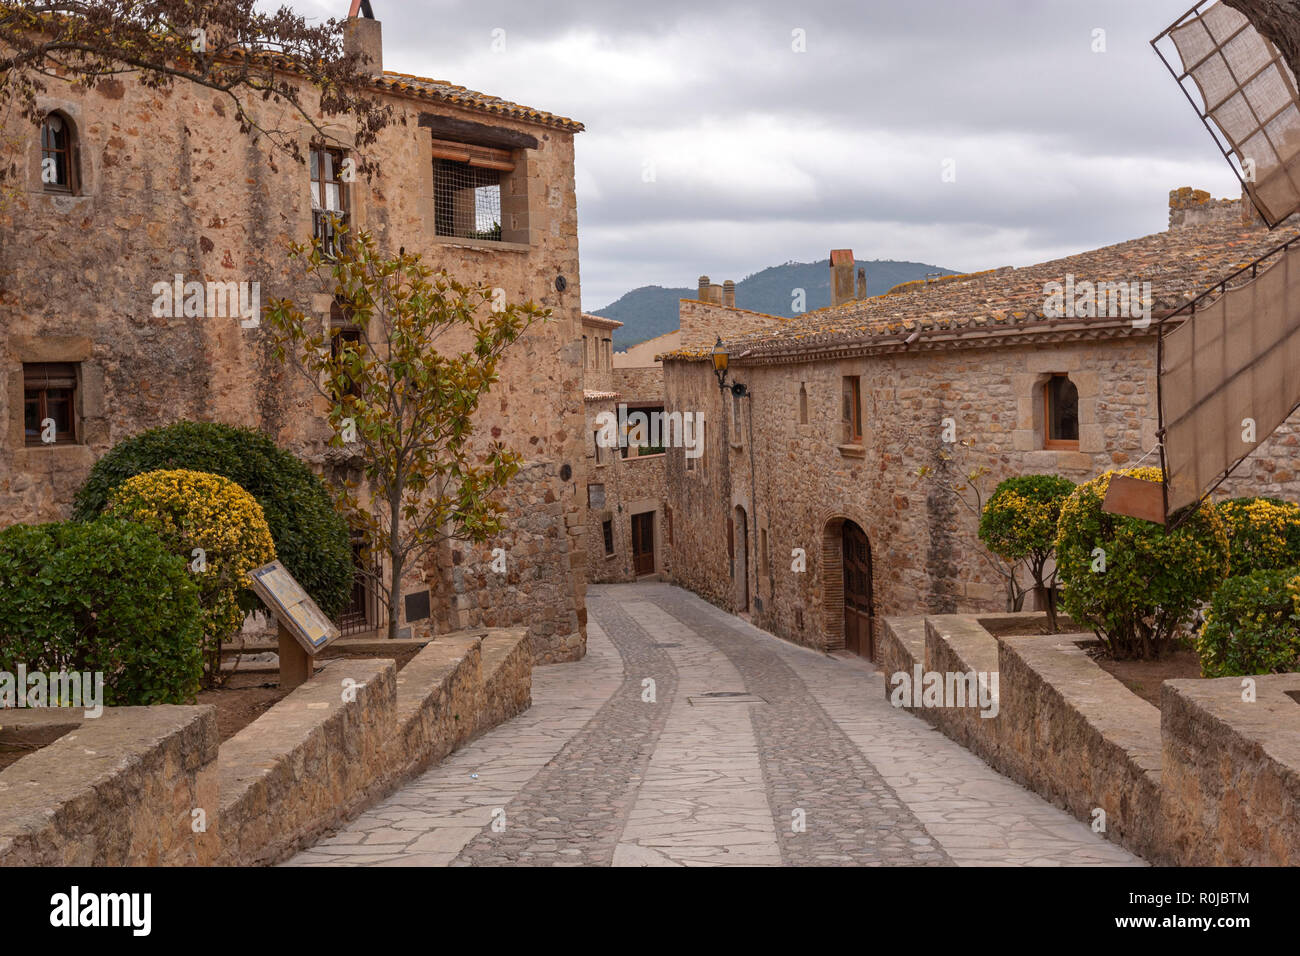 Pals a medieval town with stone houses in Girona Province, Catalonia, Spain Stock Photo